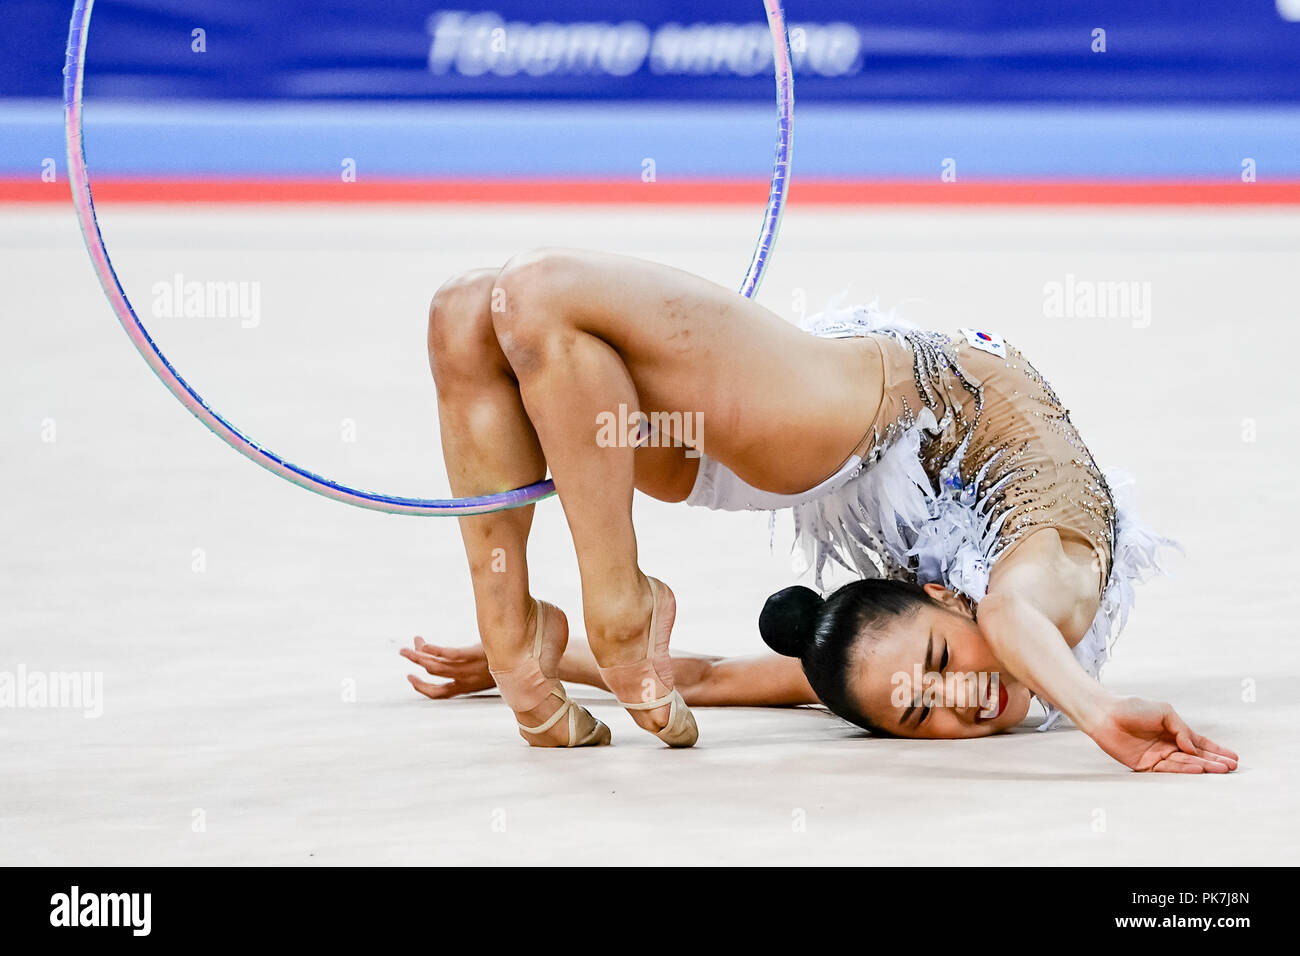 September 11, 2018: Goeun Seo of Â South Korea during Rhythmic Gymnastics World Championships at the Arena Armeec in Sofia at the 36th FIG Rhythmic Gymnastics World Championships. Ulrik Pedersen/CSM Stock Photo